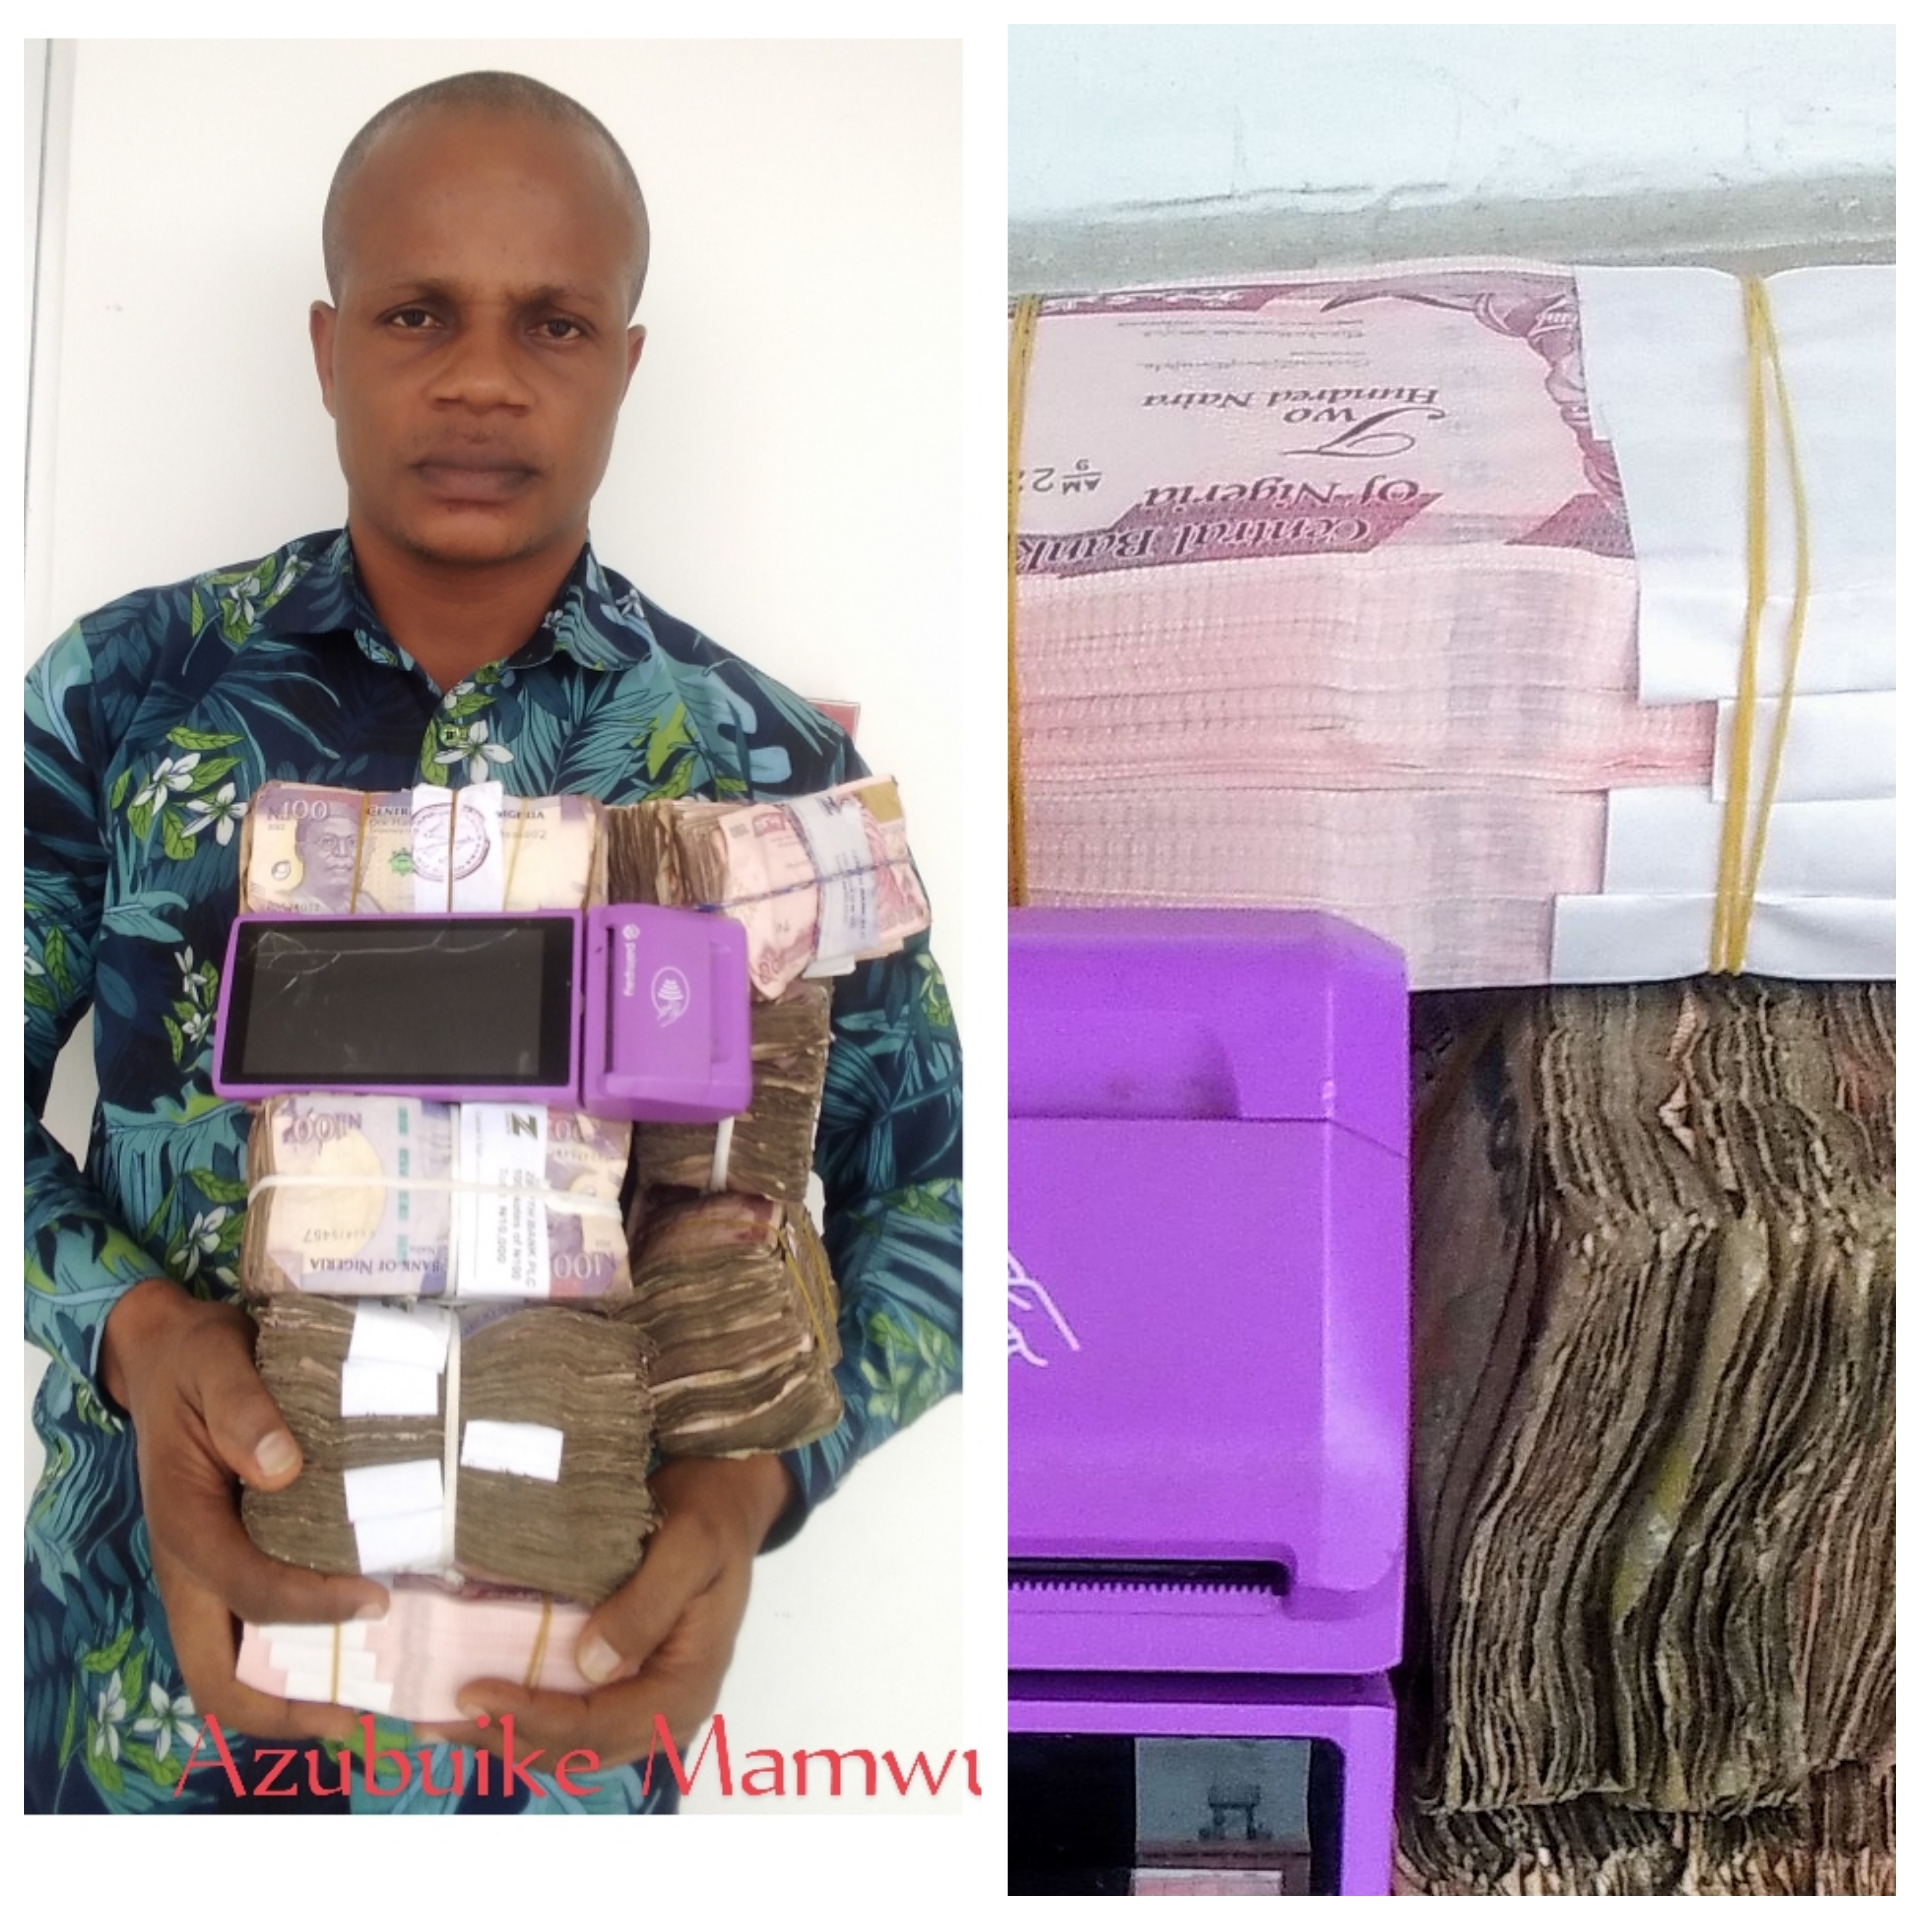 EFCC arraigns man for currency racketeering